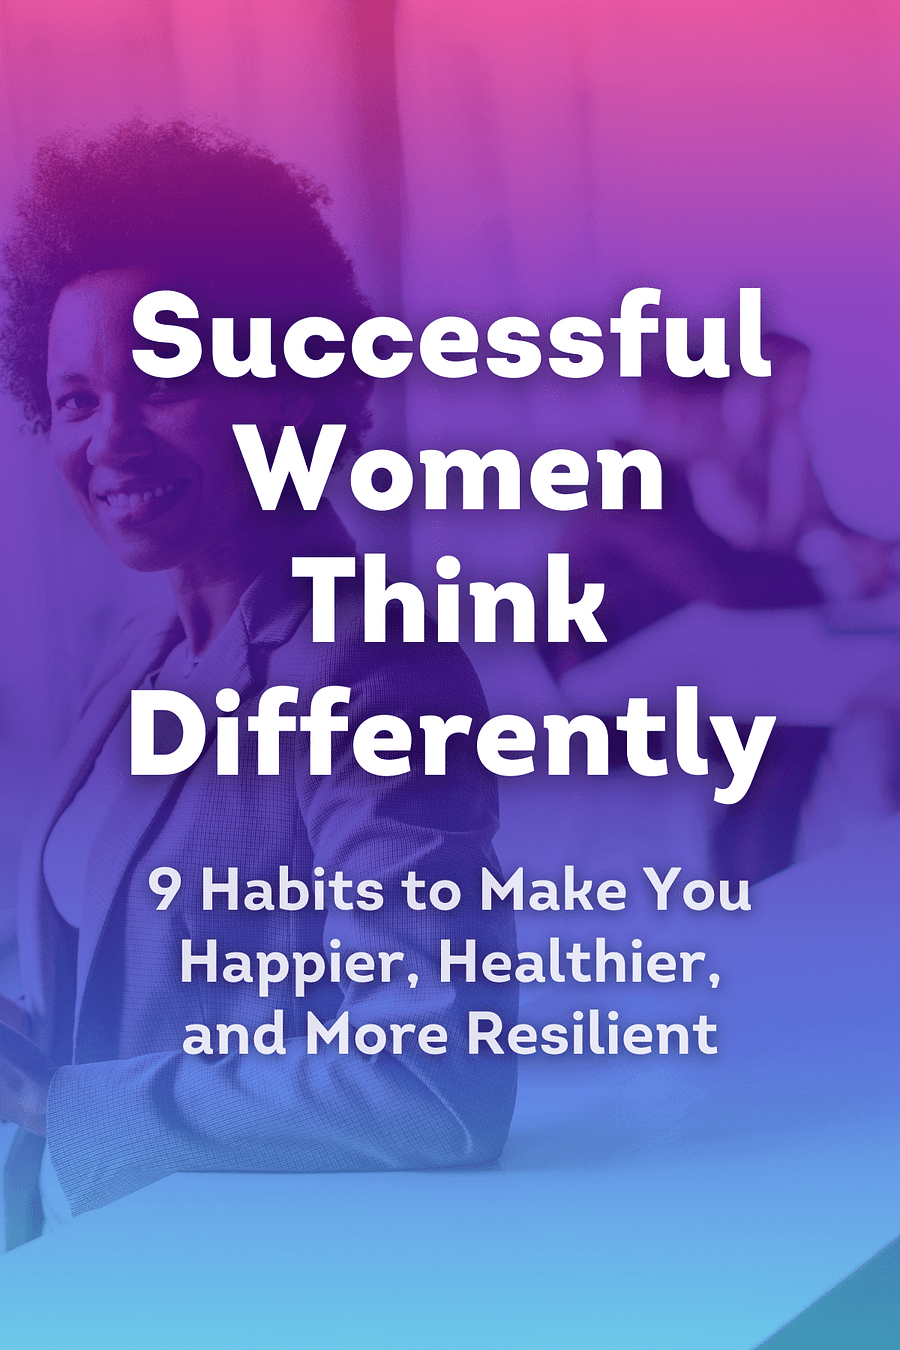 Successful Women Think Differently by Valorie Burton - Book Summary